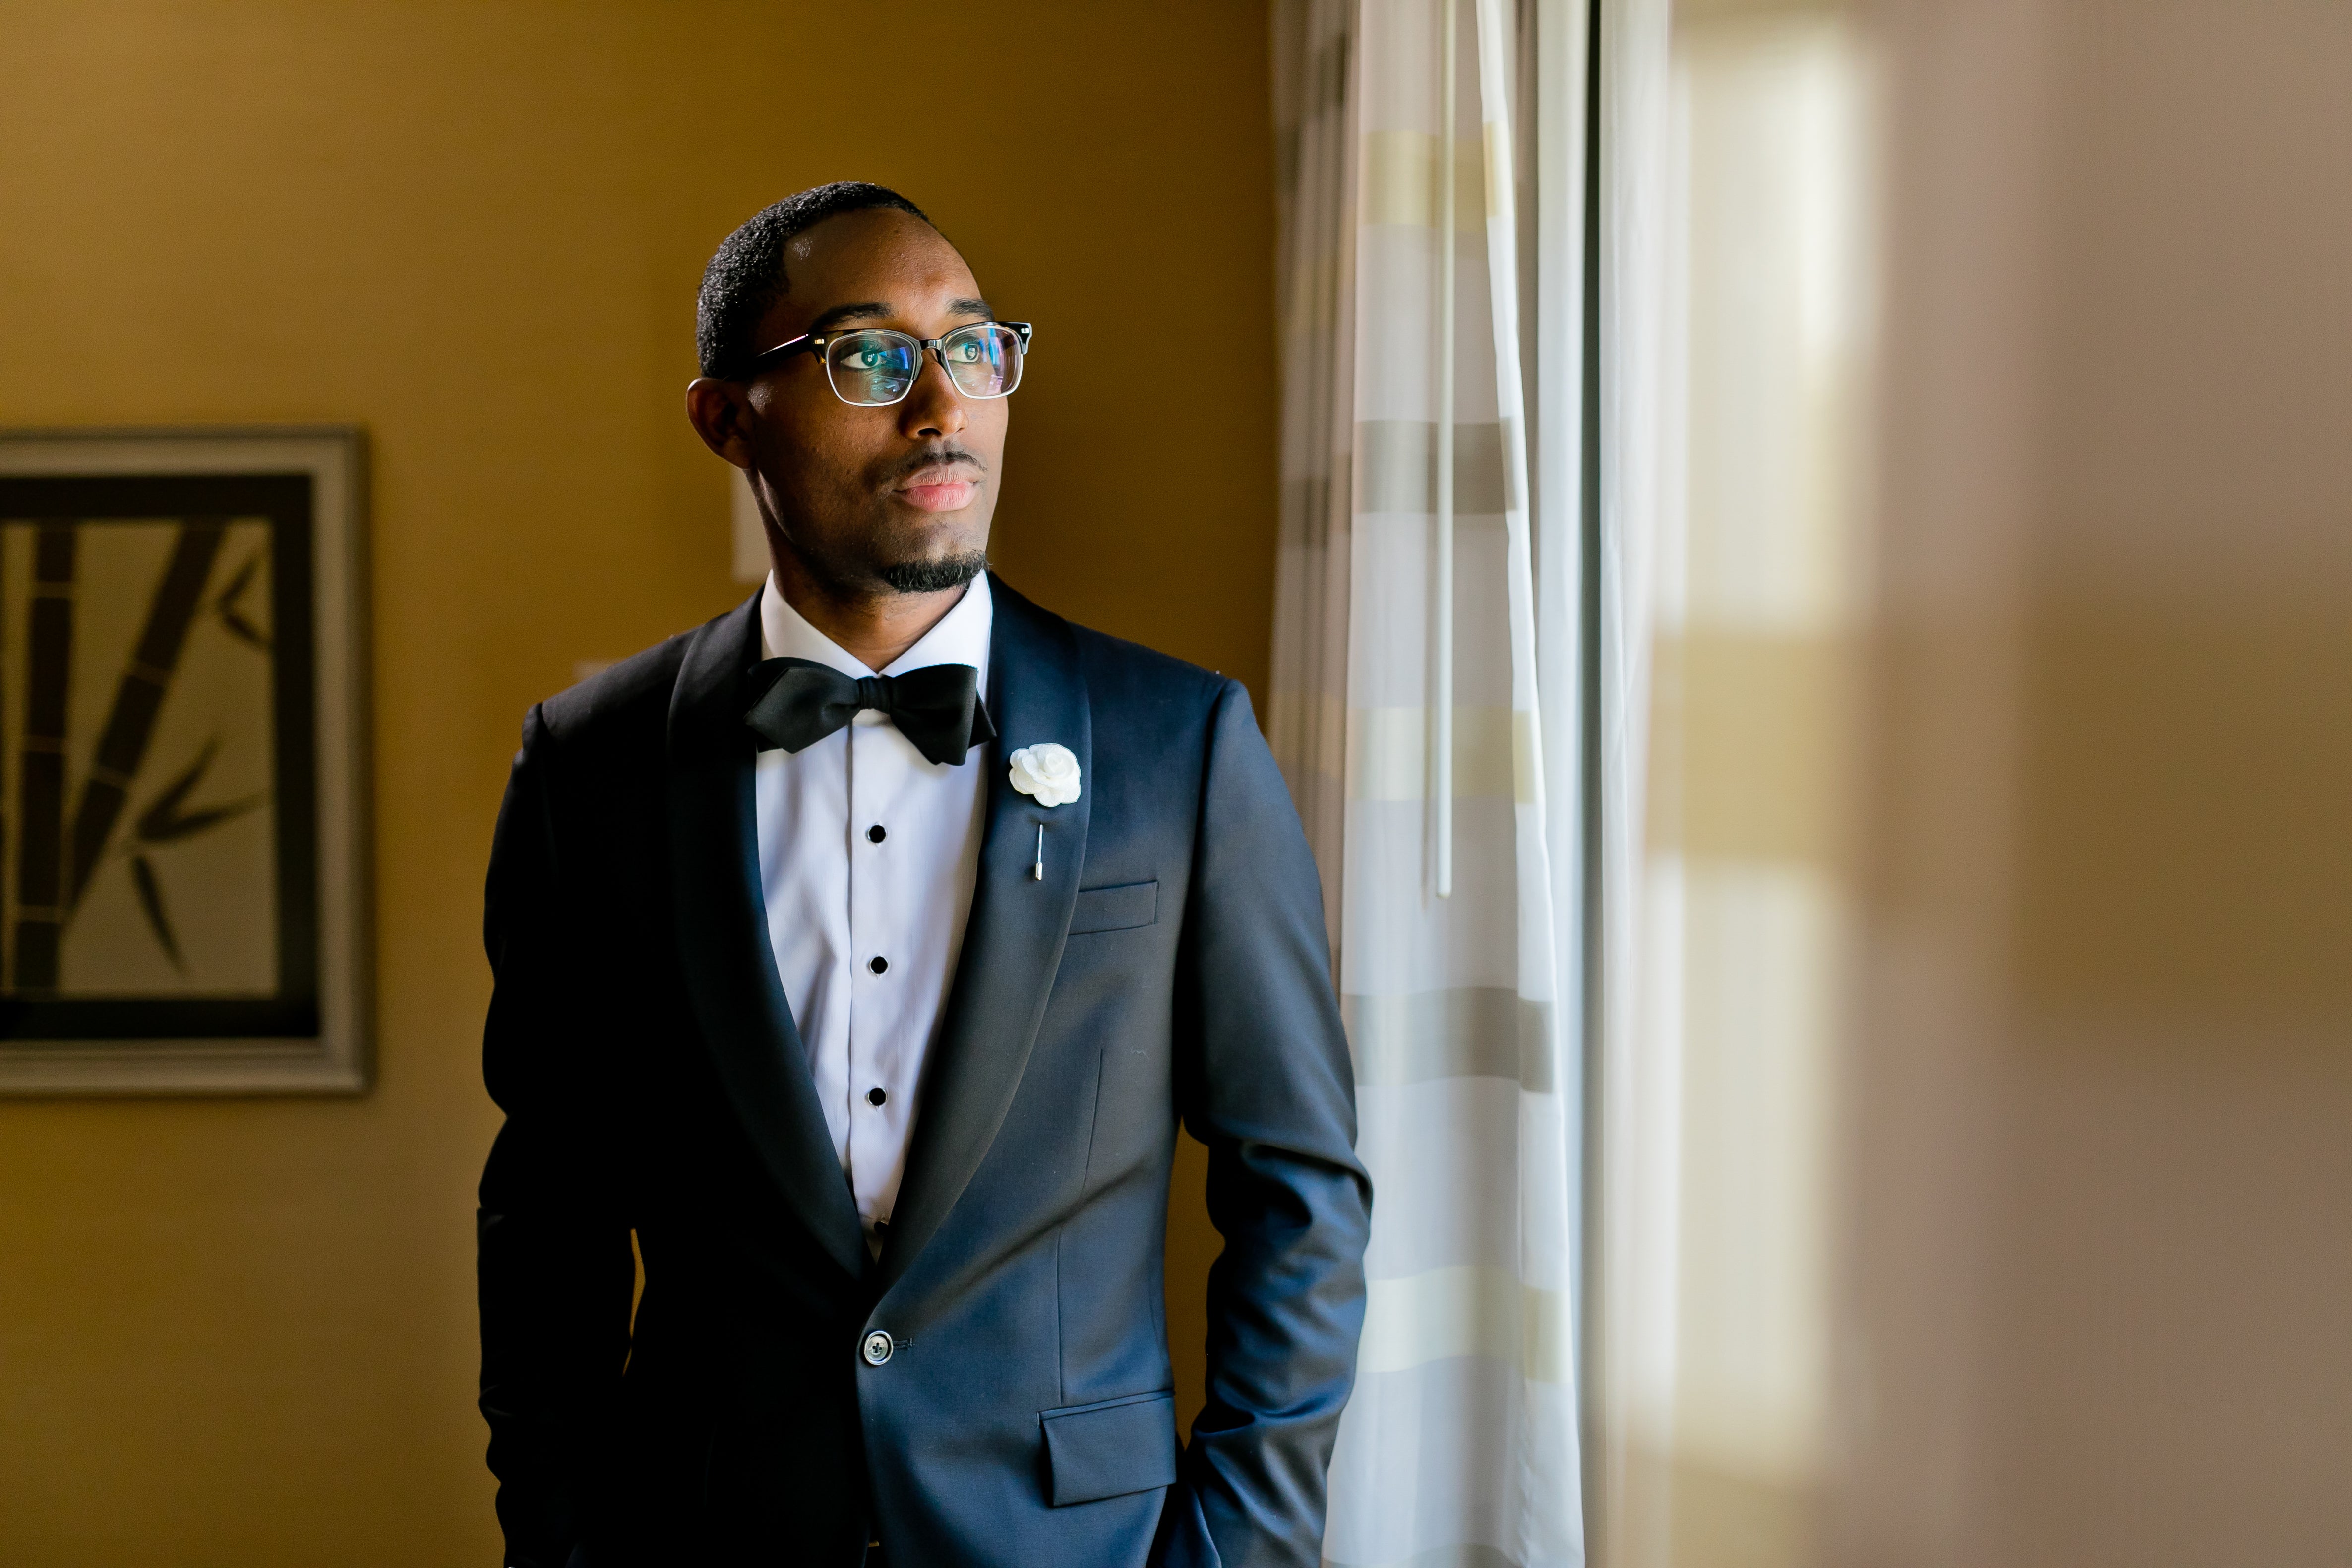 Bridal Bliss: Howard University Sweethearts Akil And Crystal's Modern Wedding Was A Moment In Time
